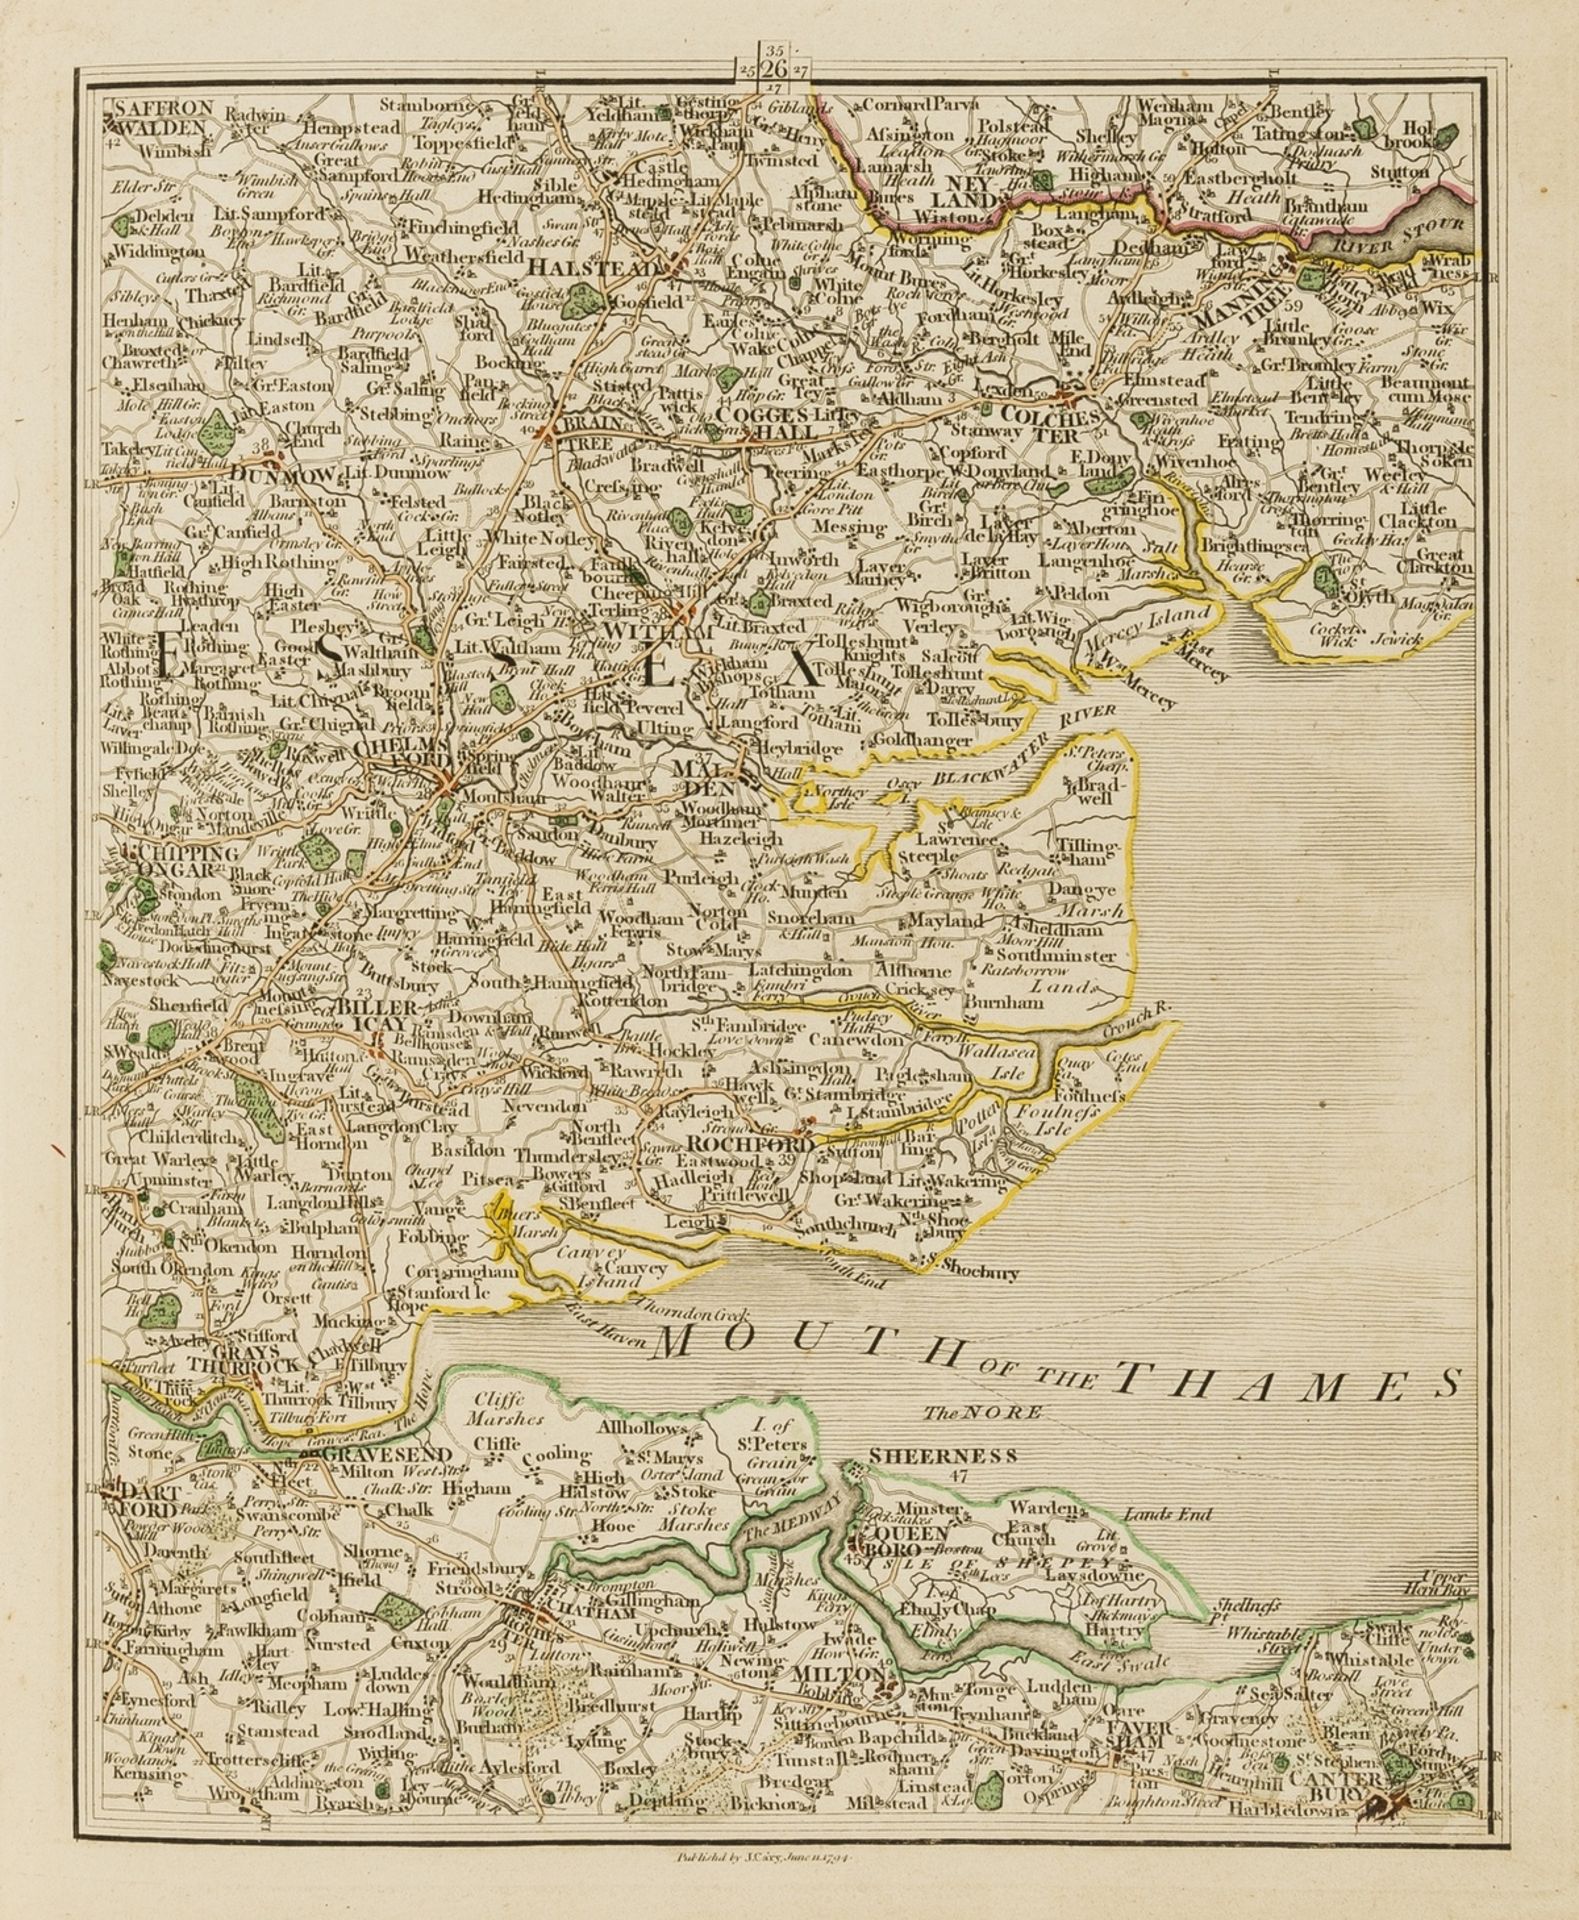 Cary (John) Cary's New Map of England and Wales with Part of Scotland, engraved maps hand-coloured …